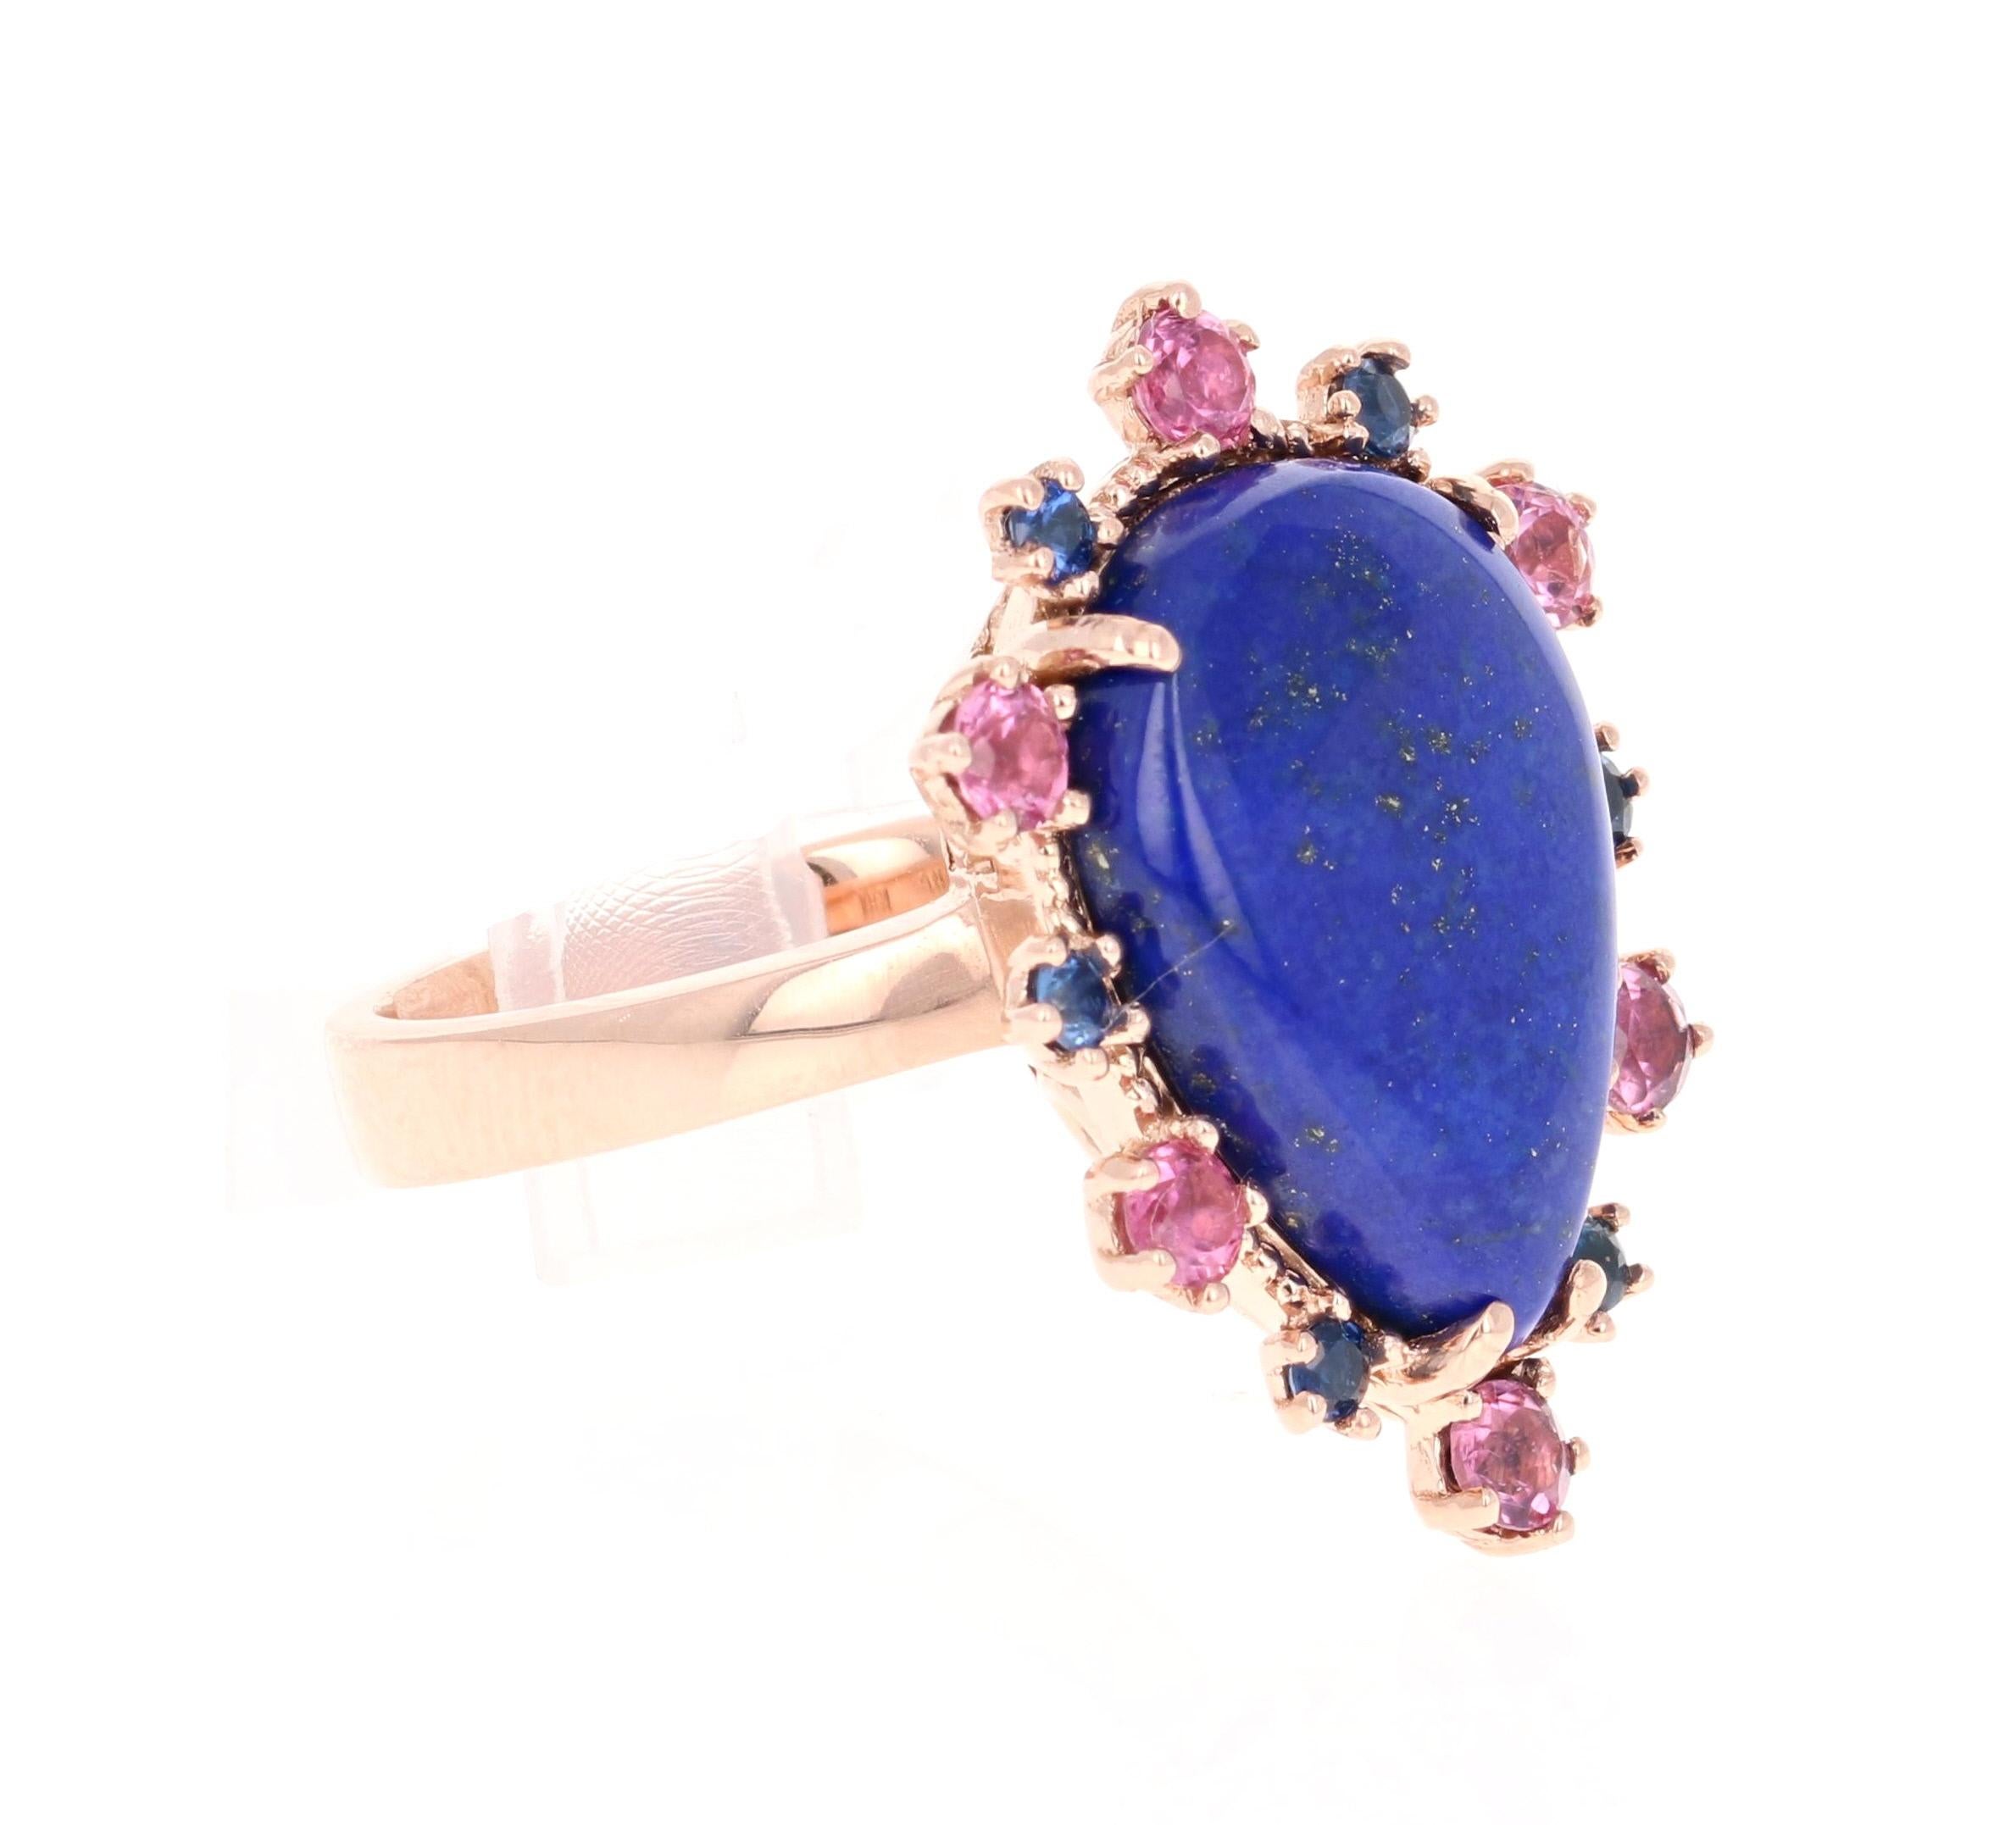 9.04 Carat Lapis Lazuli Tourmaline and Sapphire Cocktail Rose Gold Ring

A beauty to say the least! This unique ring has a beautiful deep blue/purple Pear Cut Lapis Lazuli that weighs 8.13 Carats. It is surrounded by 6 Tourmalines that weigh 0.65